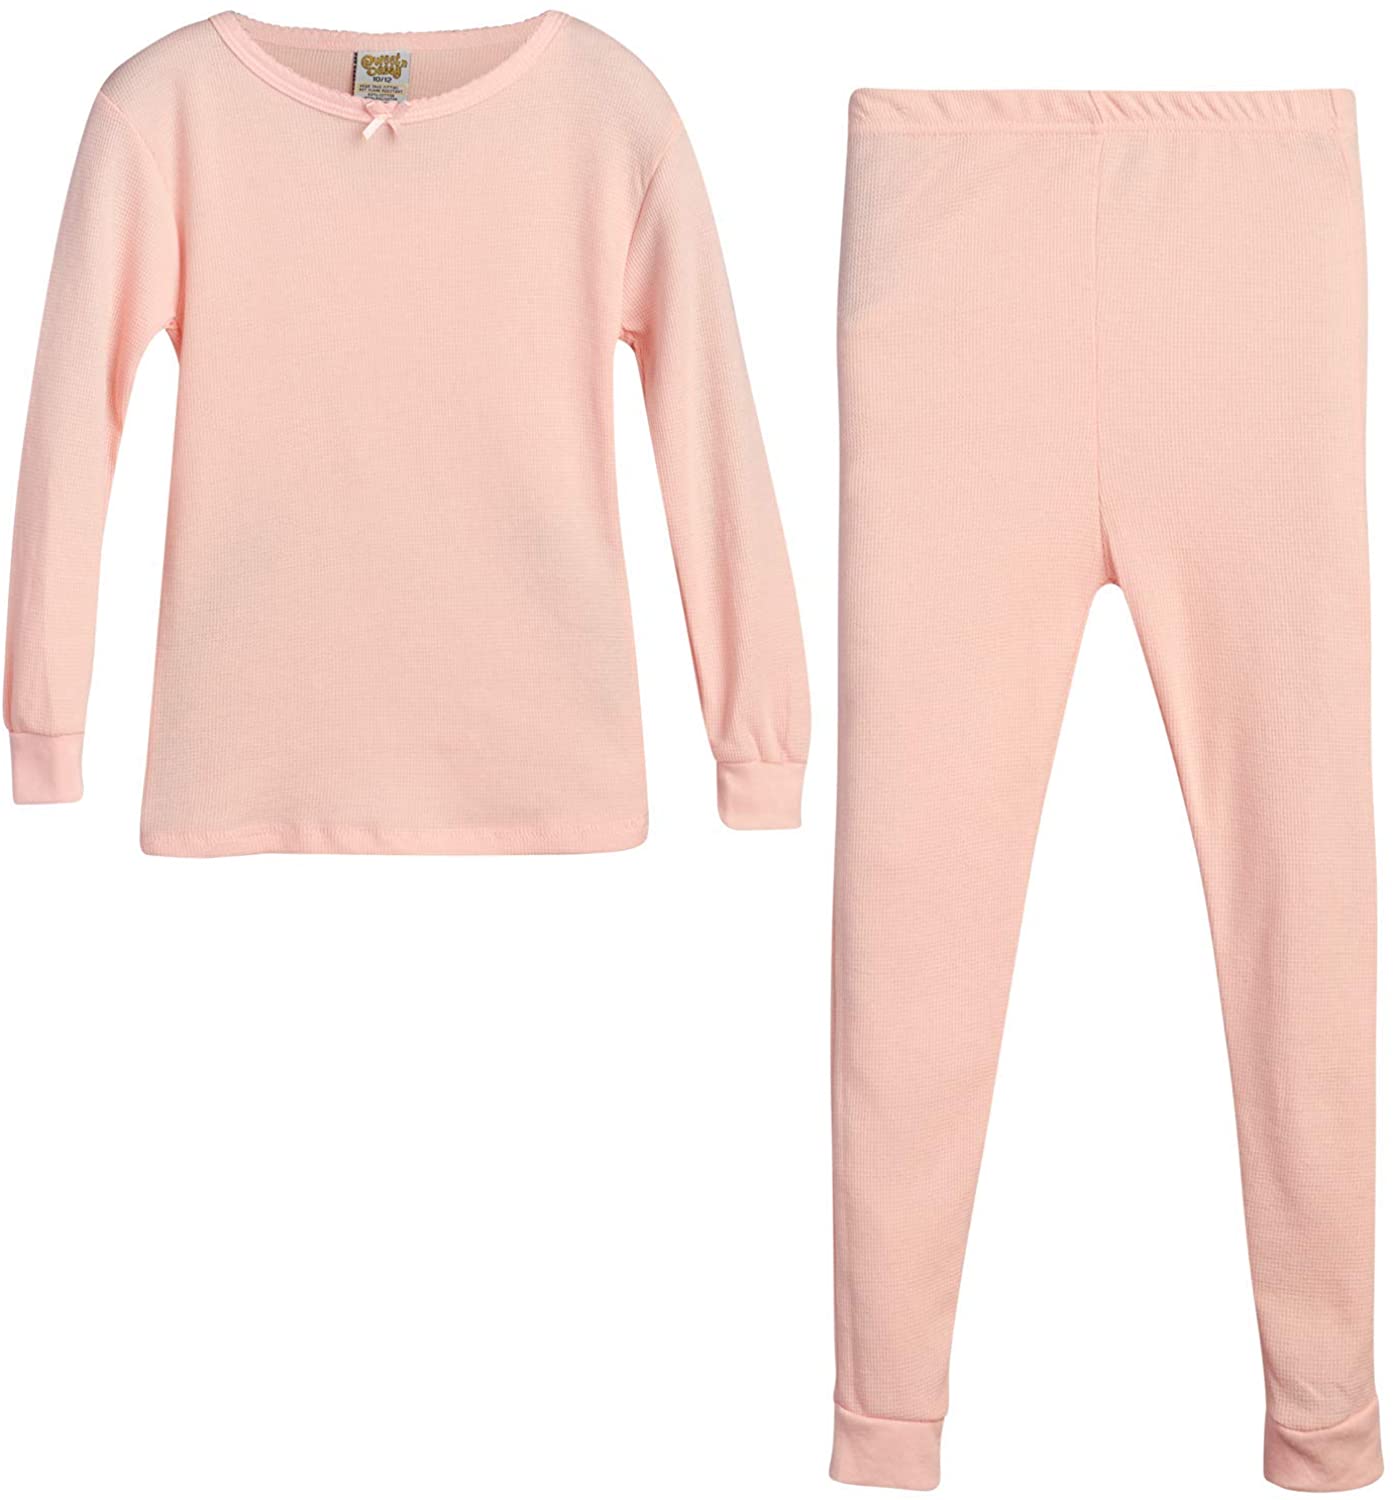 Sweet & Sassy Girls' 2-Piece Thermal Warm Underwear Top and Pant Set 